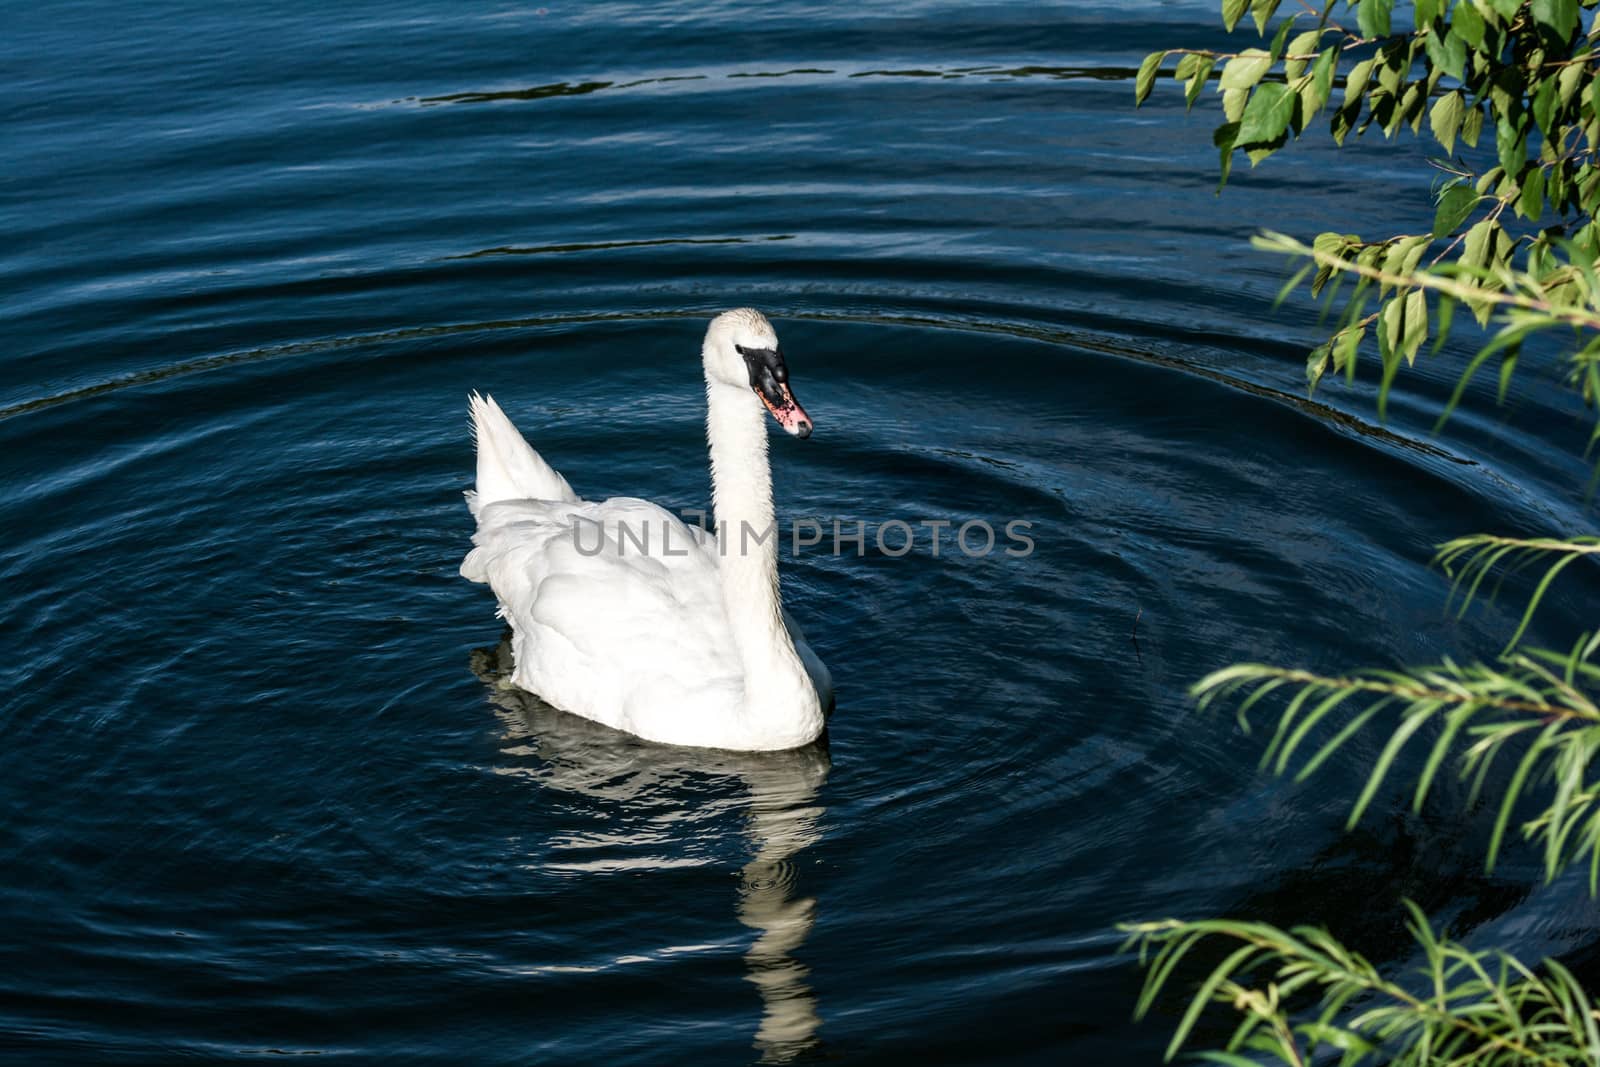 Goose in a small pond by IVYPHOTOS